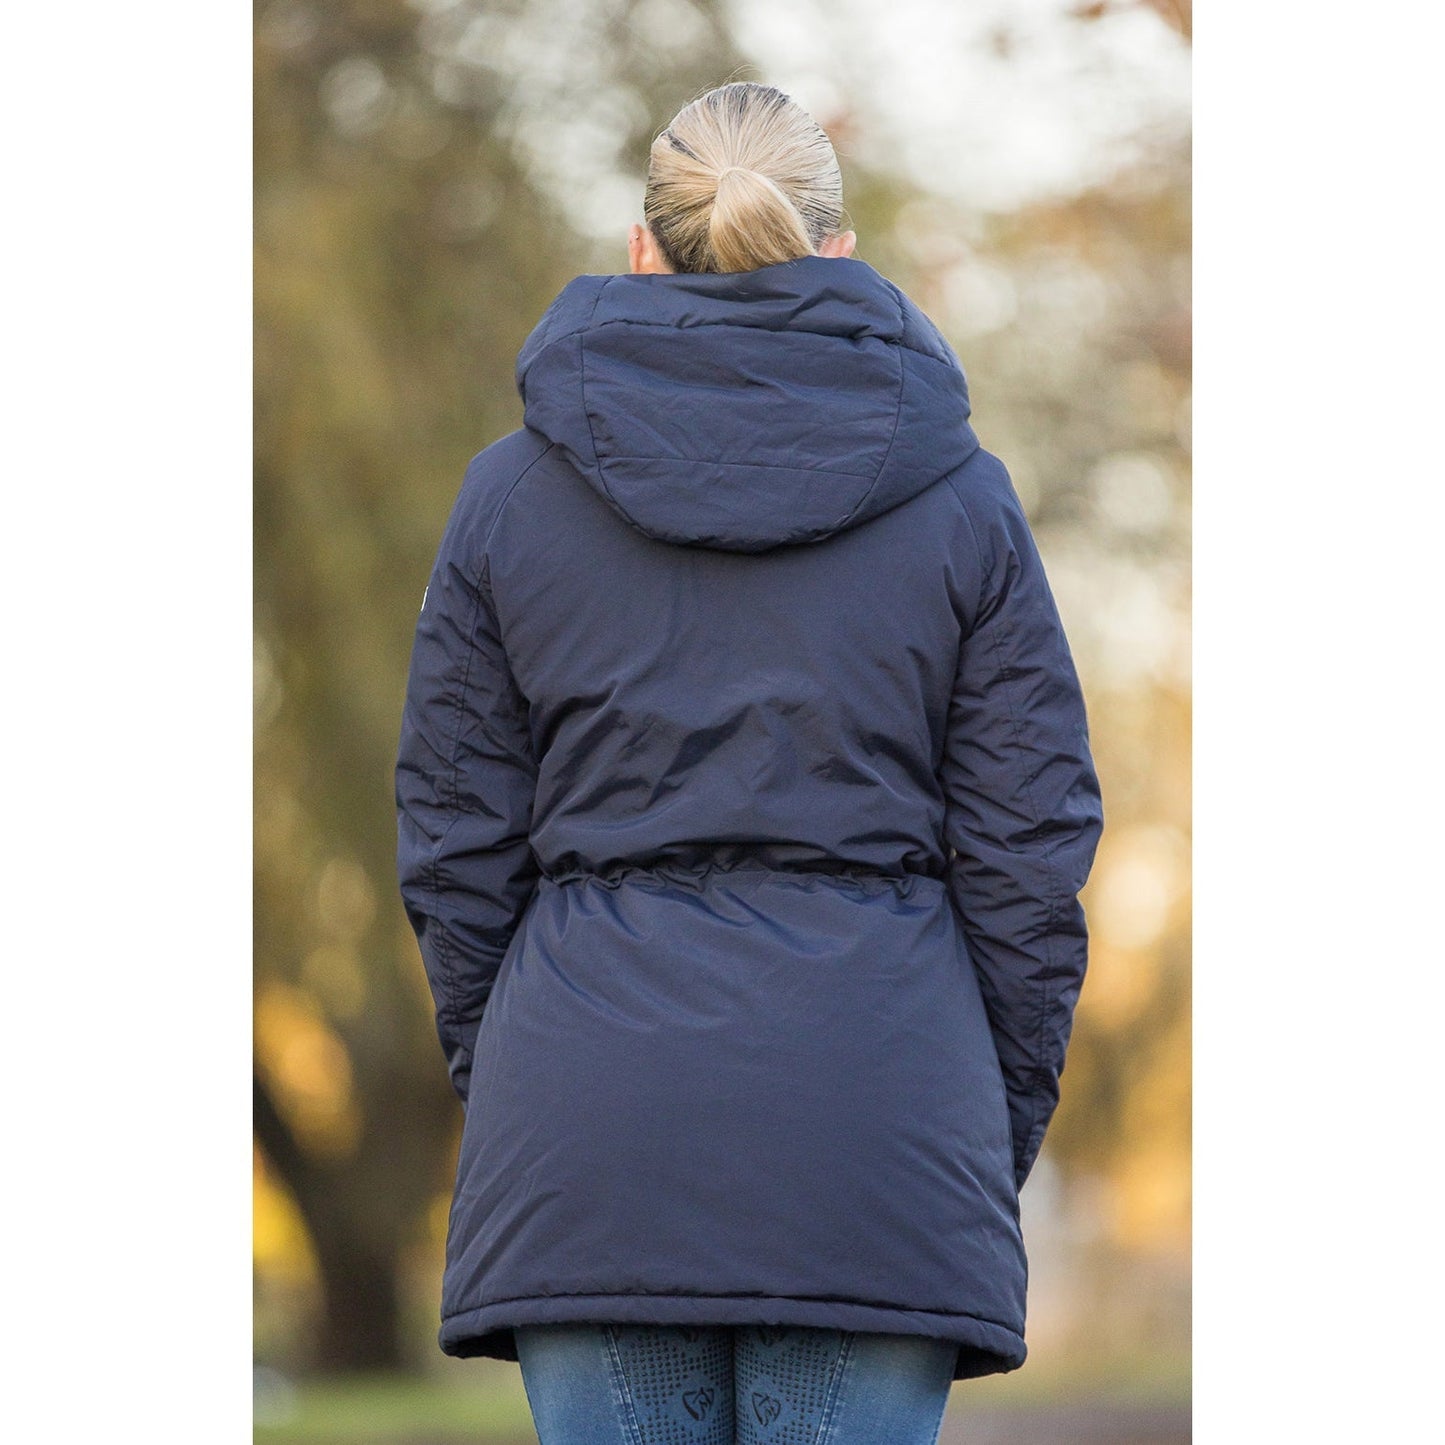 Waterproof Charlotte Jacket from BARE Equestrian Winter Series-Southern Sport Horses-The Equestrian